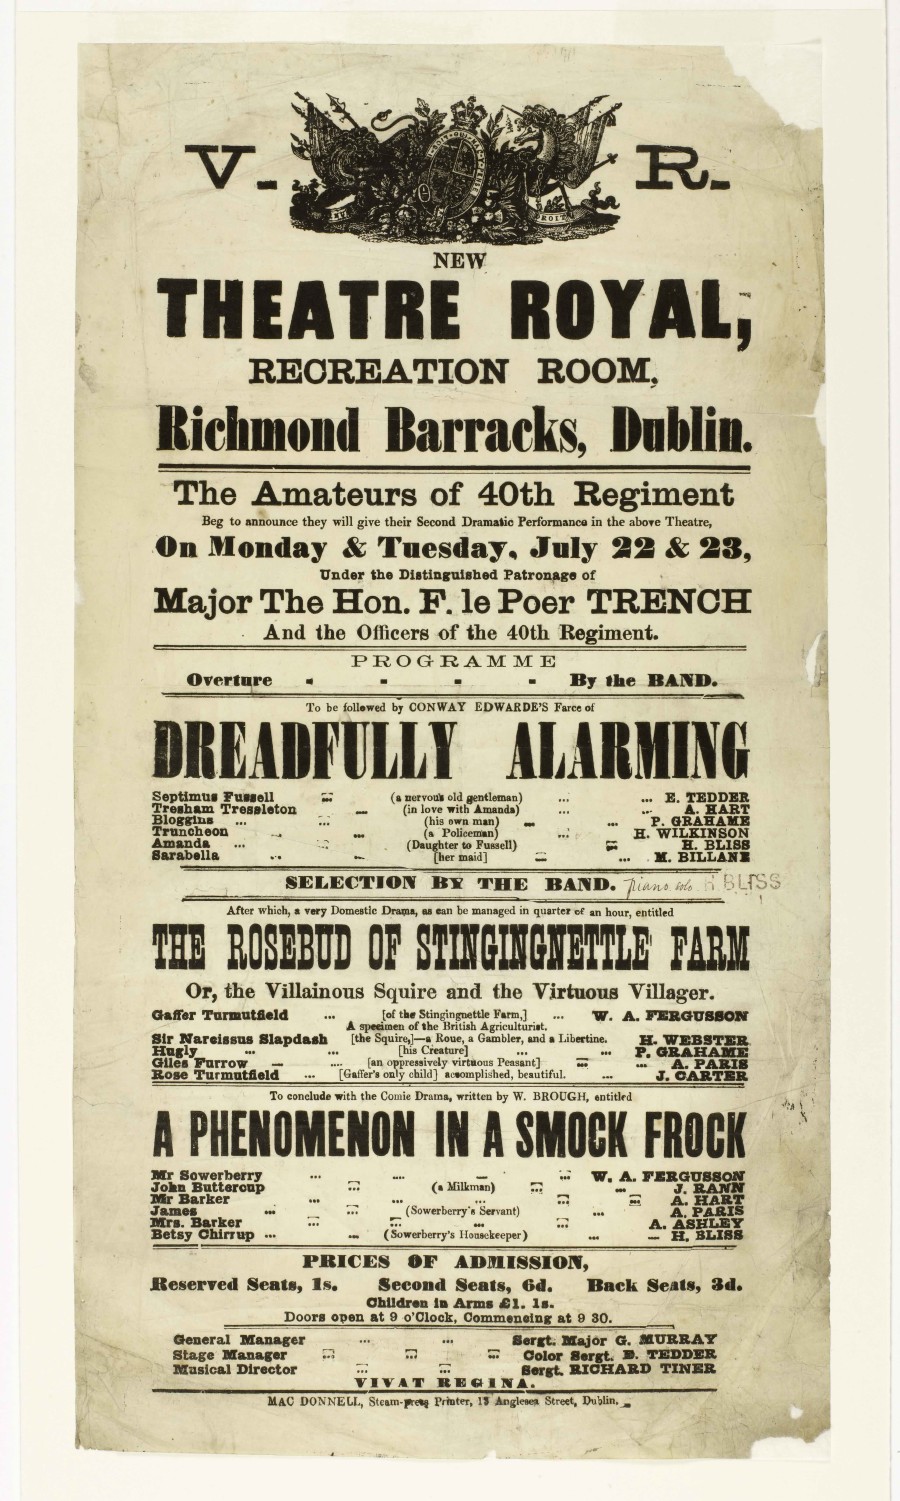 Theatre poster for Richmond Barracks. Credit: National Museum of Ireland NMIHA-1941-4.